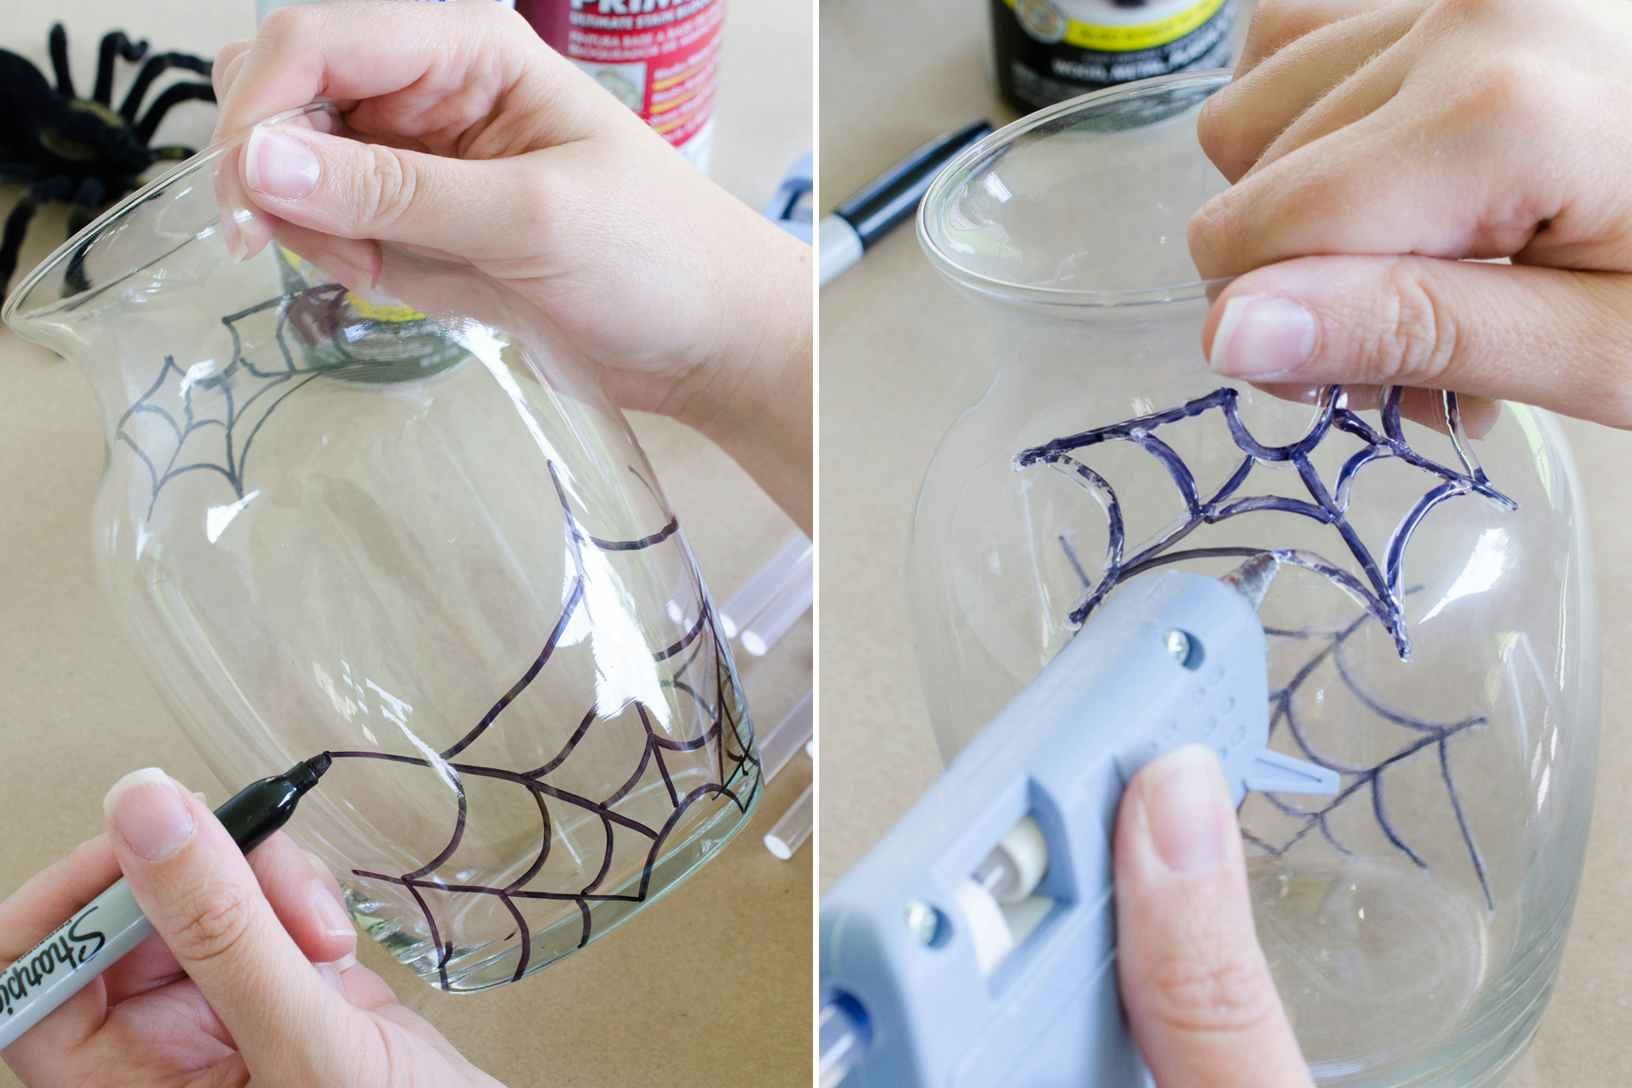 someone using a sharpie to draw web on a vase and then someone using hot glue on the web